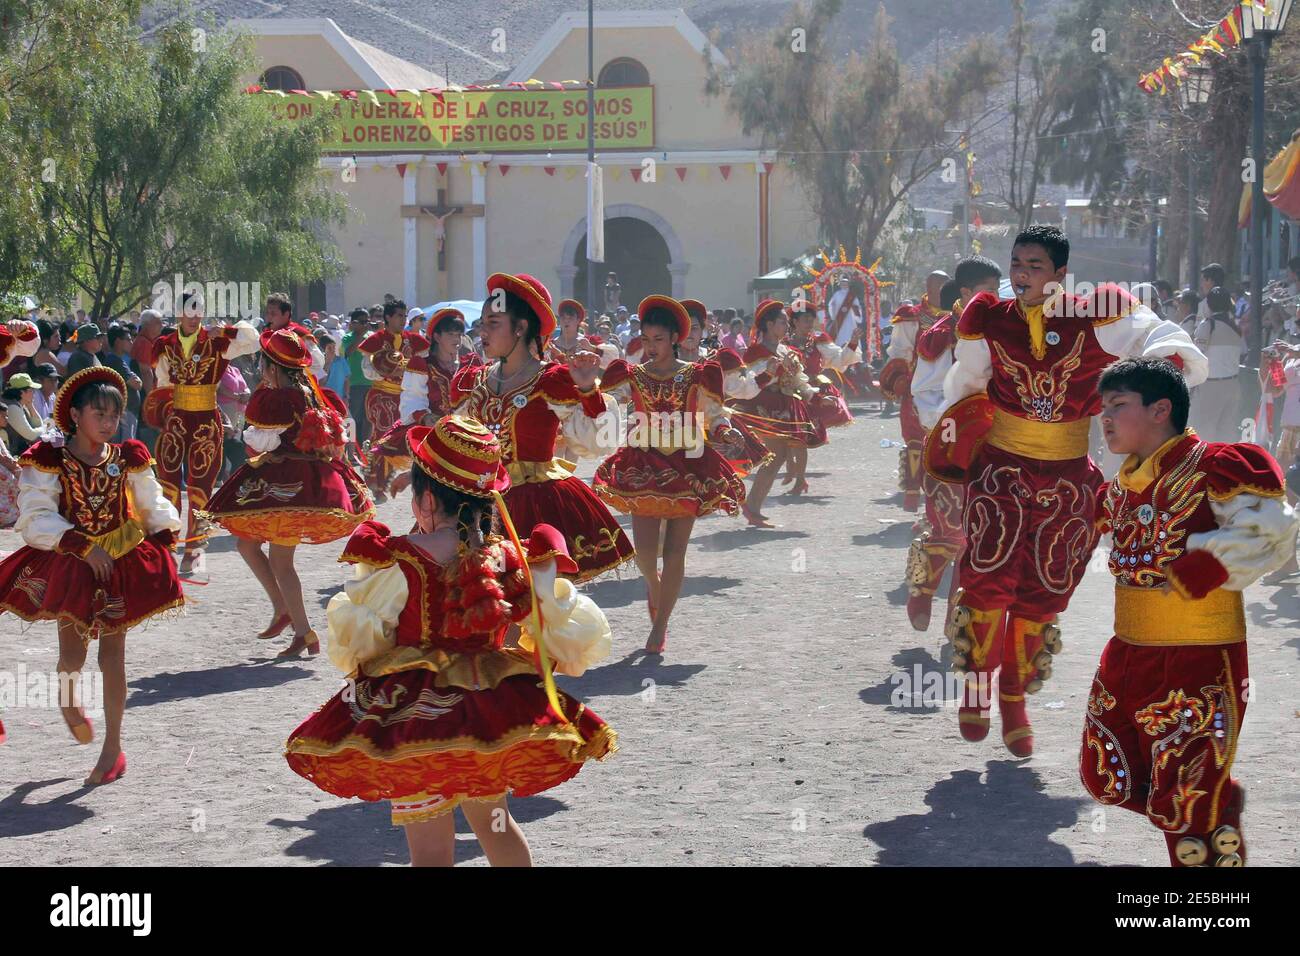 Traditional dance and costumes in Iquique, Chile Stock Photo